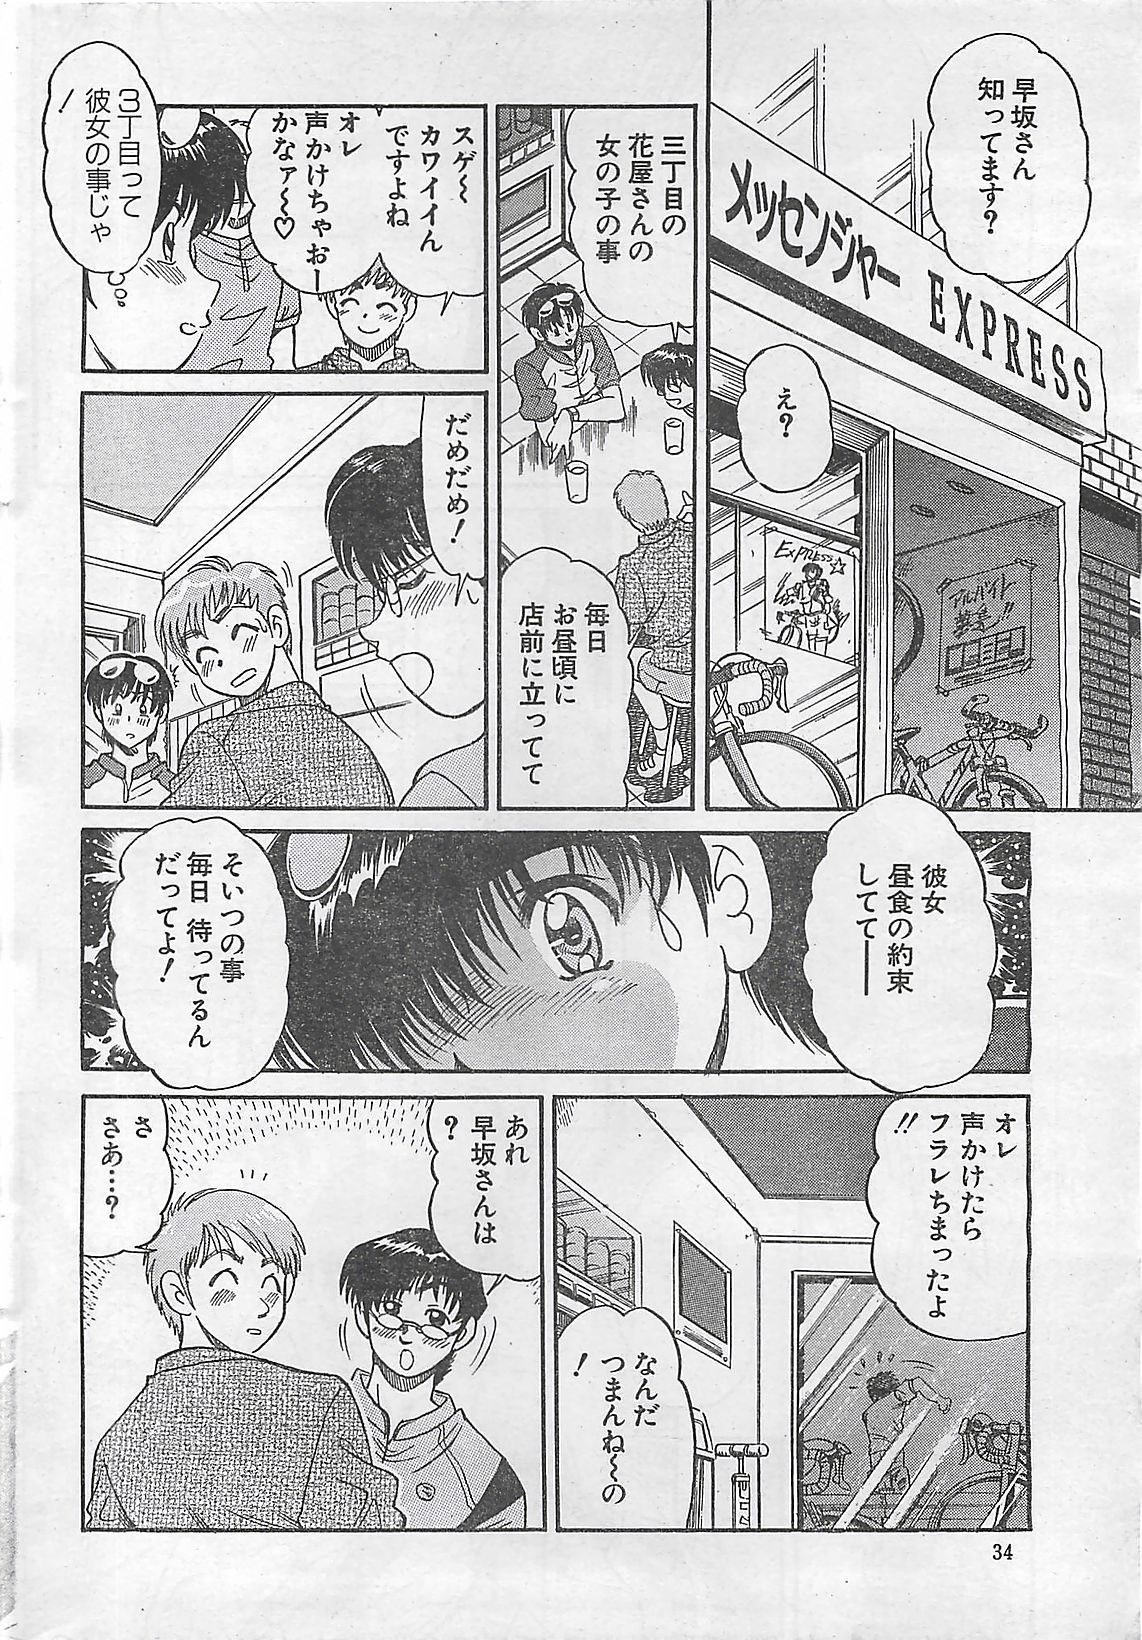 Action Pizazz 2003-09 page 34 full